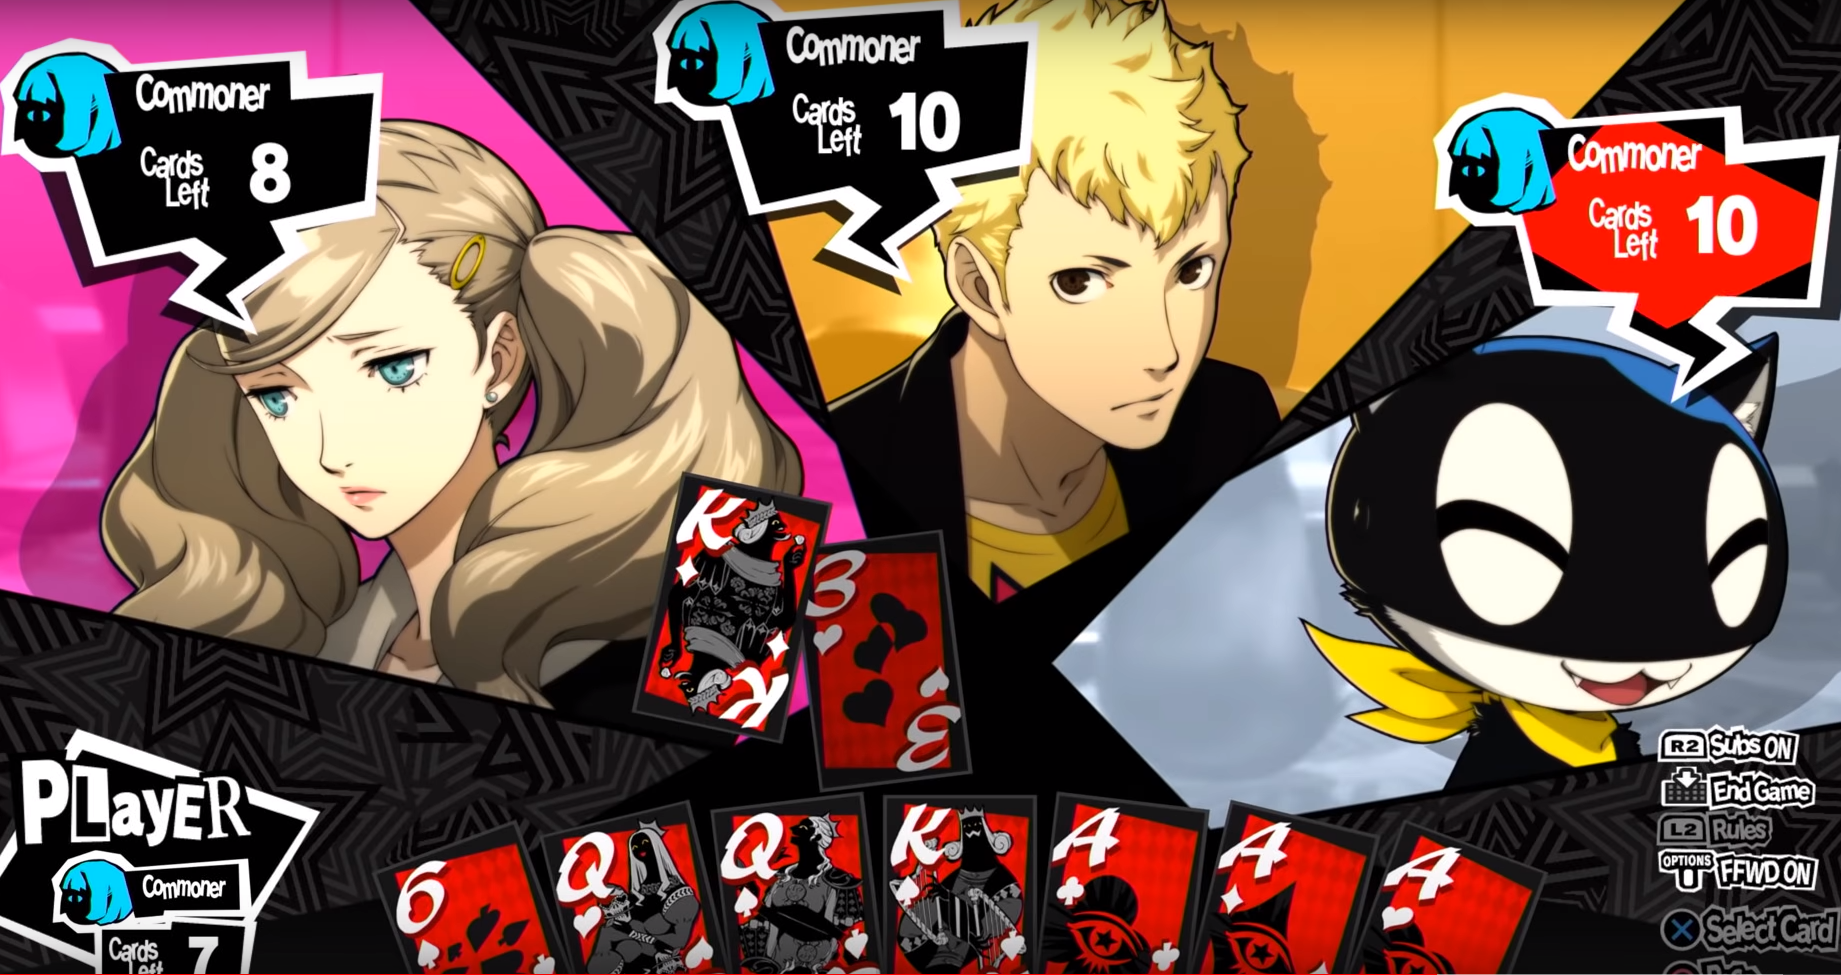 Persona 5 Royal Thieves Den Mode Has A Card Game, Cutscenes, Music ...